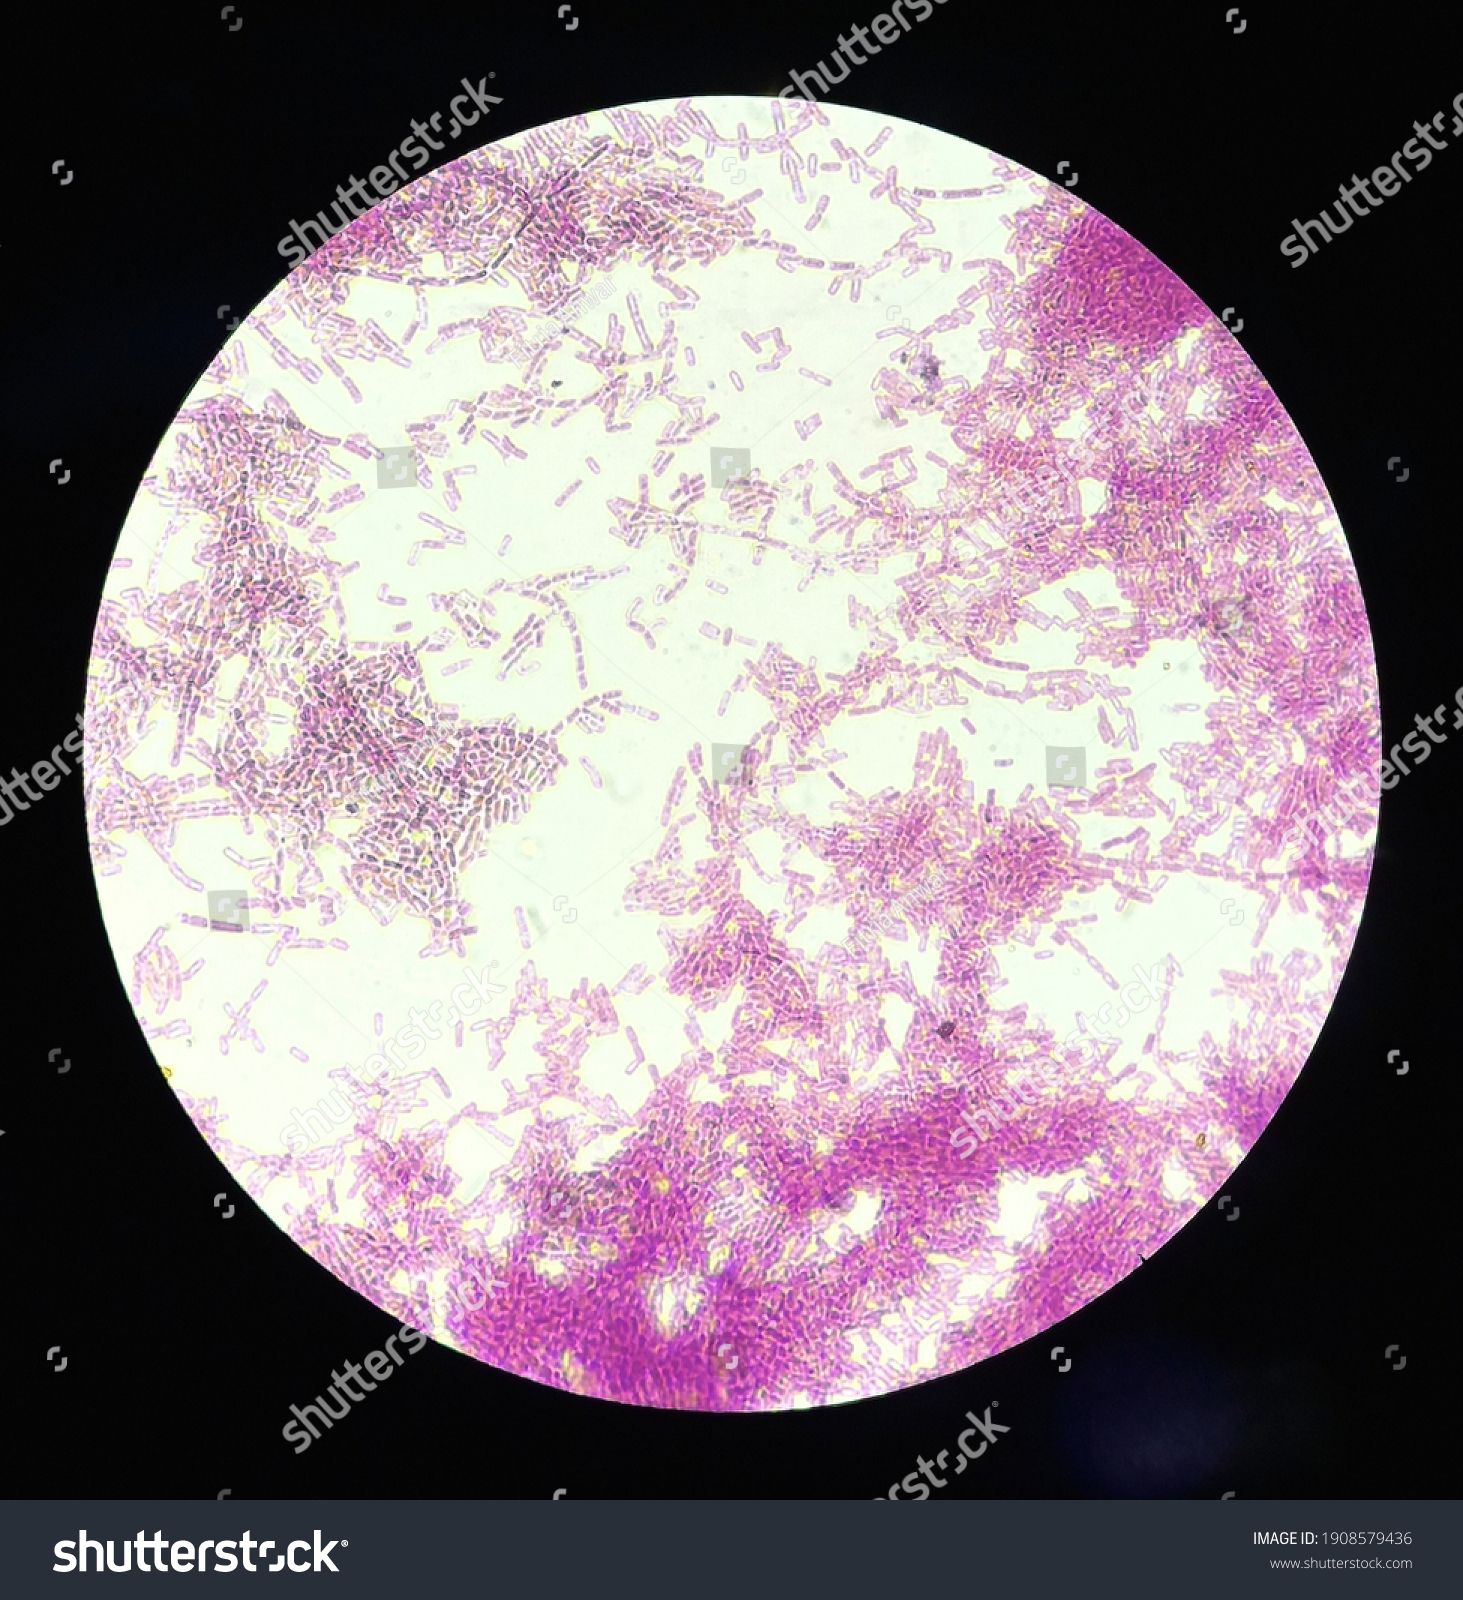 Gram stain of the bacteria Bacillus subtilis under a microscope with a magnification of 100 times #1908579436